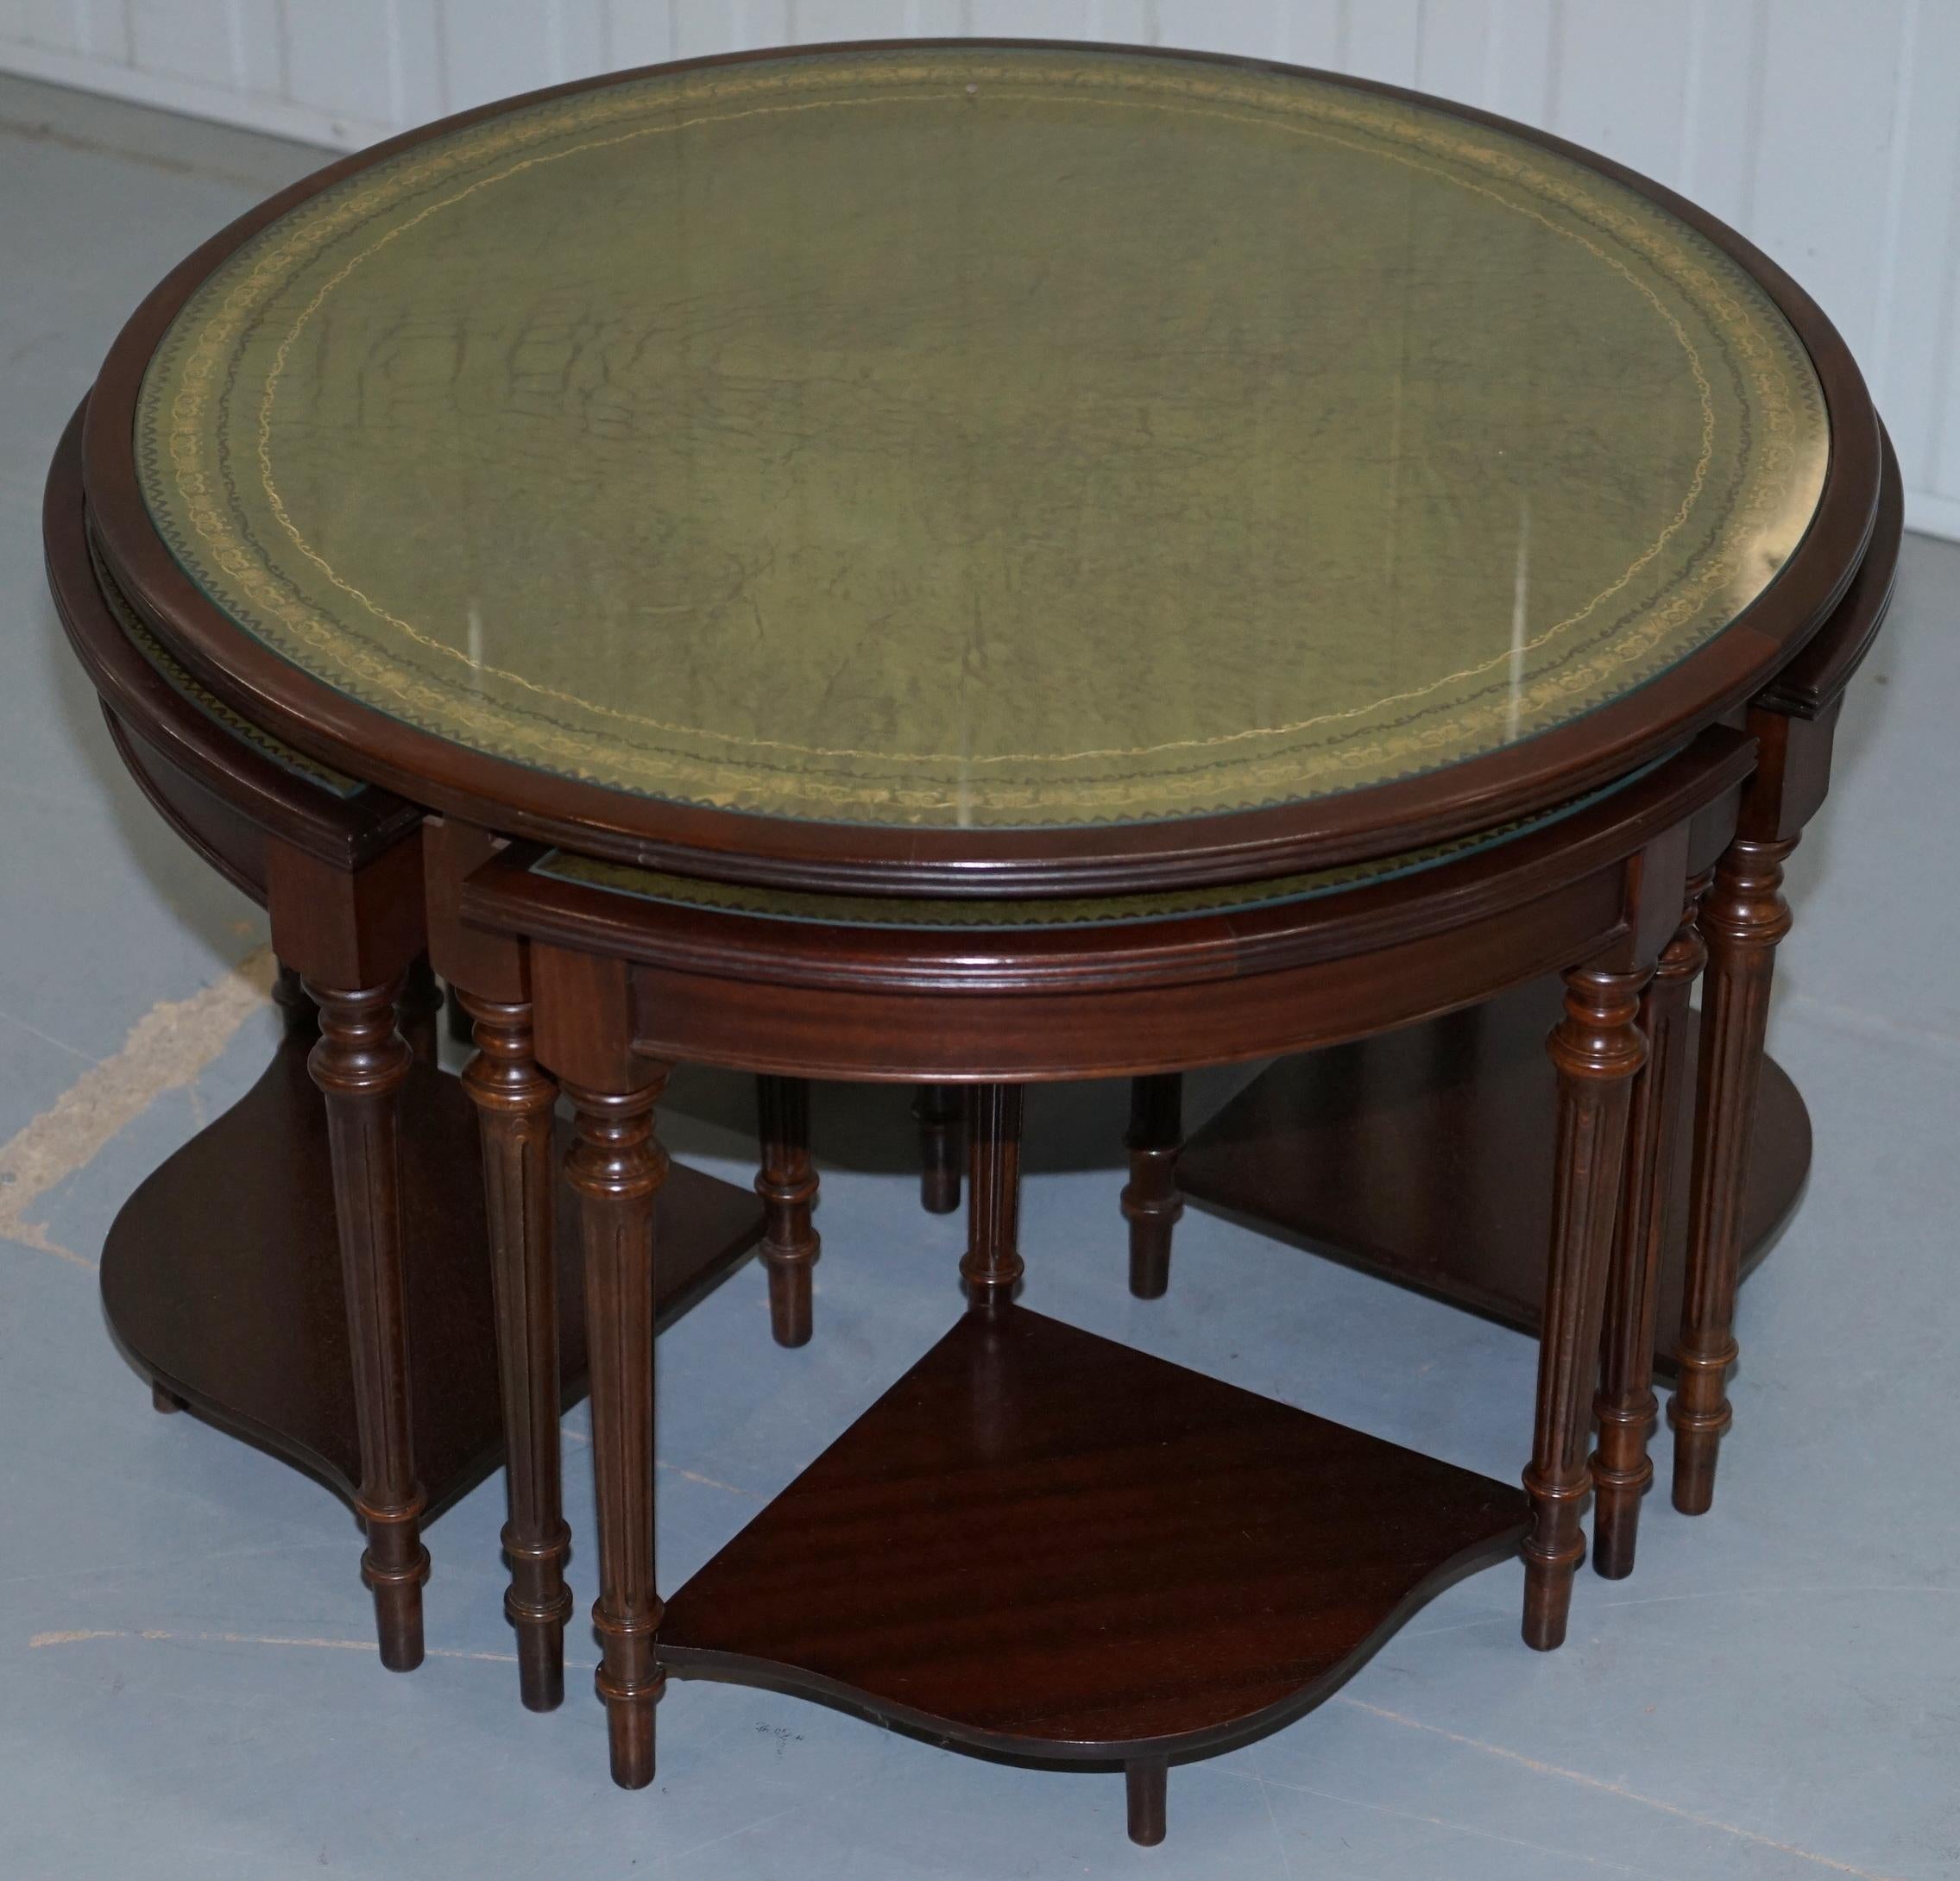 We are delighted to offer for sale this very nicely made Mahogany round table with green leather top which recess four triangle nesting tables

This is a very functional and decorative piece of furniture, each table has a fully aniline 100% cattle